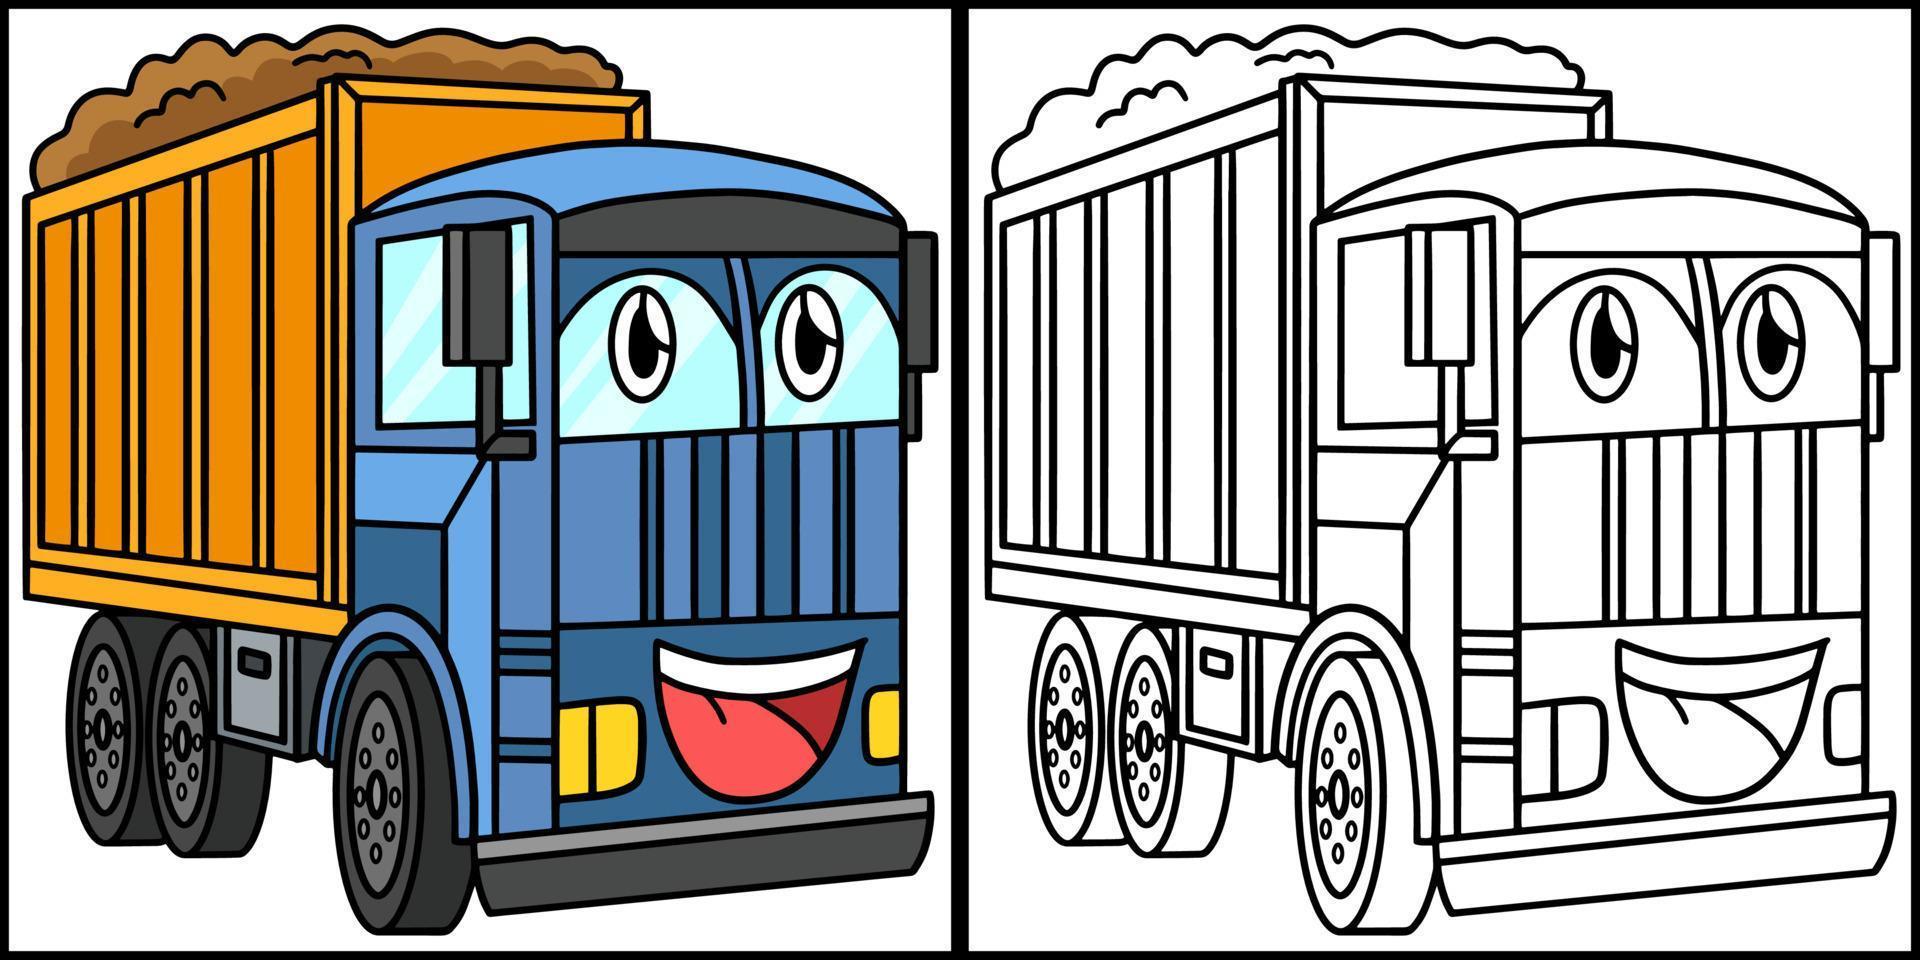 Dump Truck with Face Vehicle Coloring Illustration vector